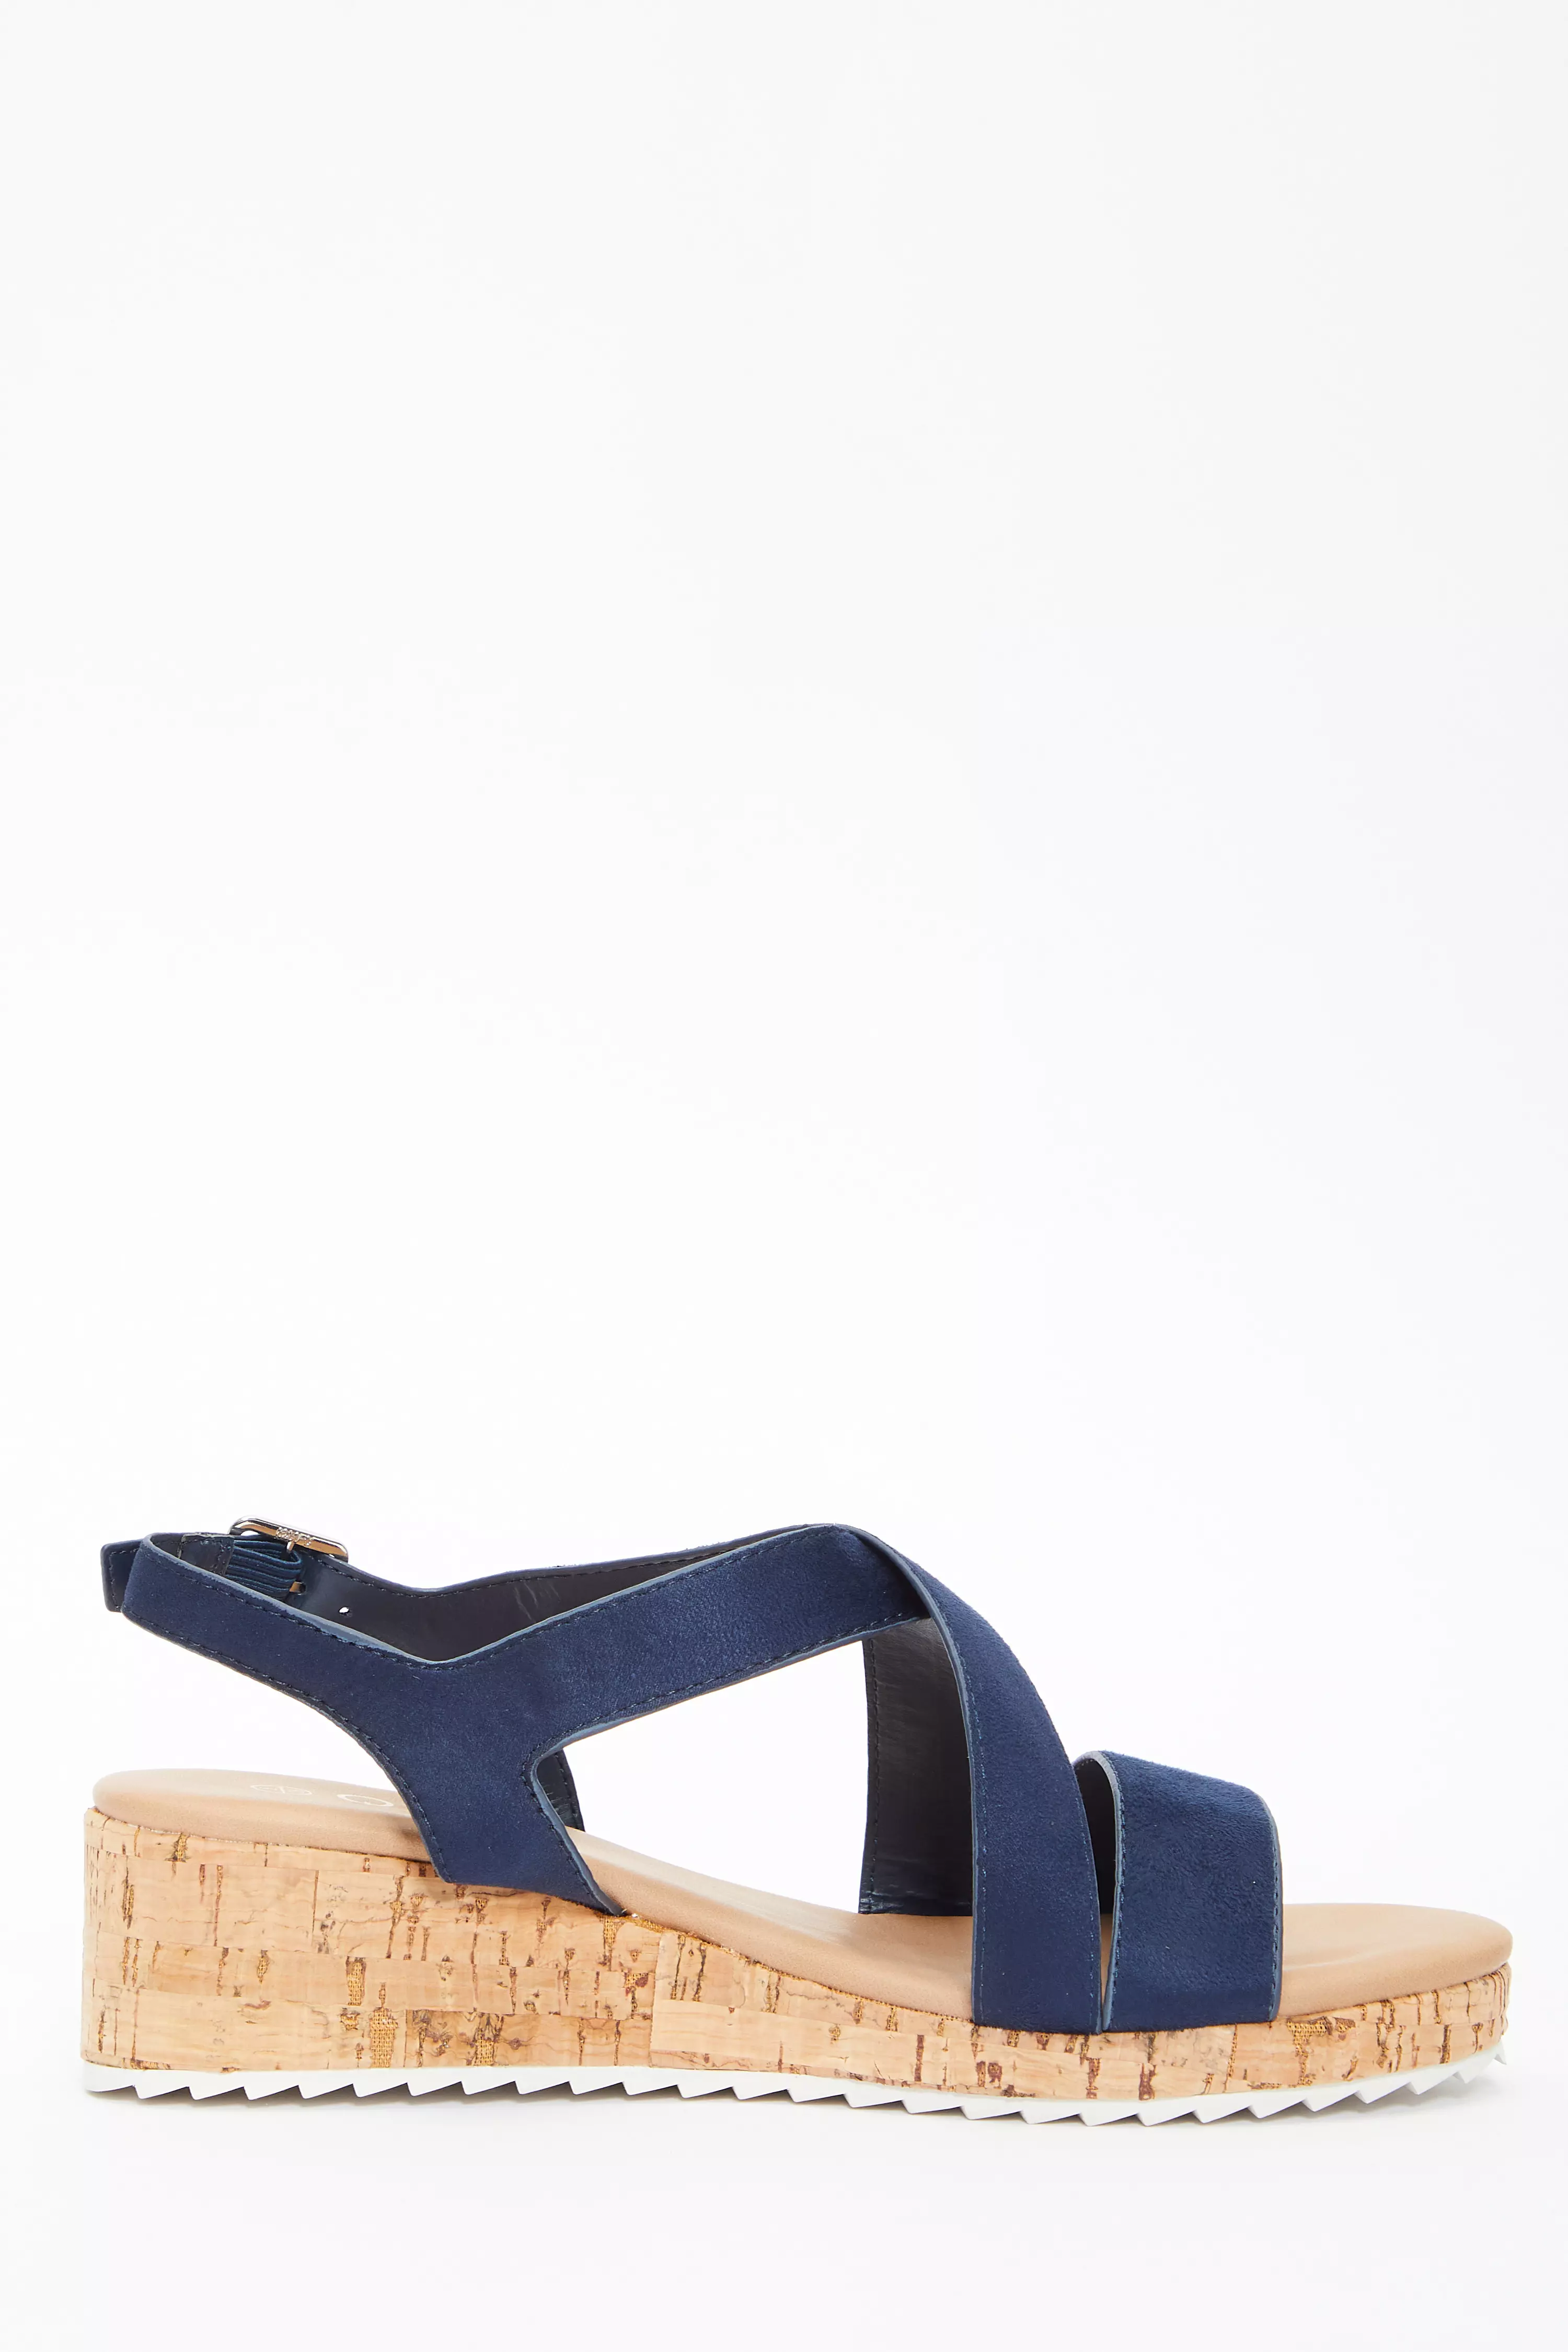 Navy Faux Suede Wedge - QUIZ Clothing